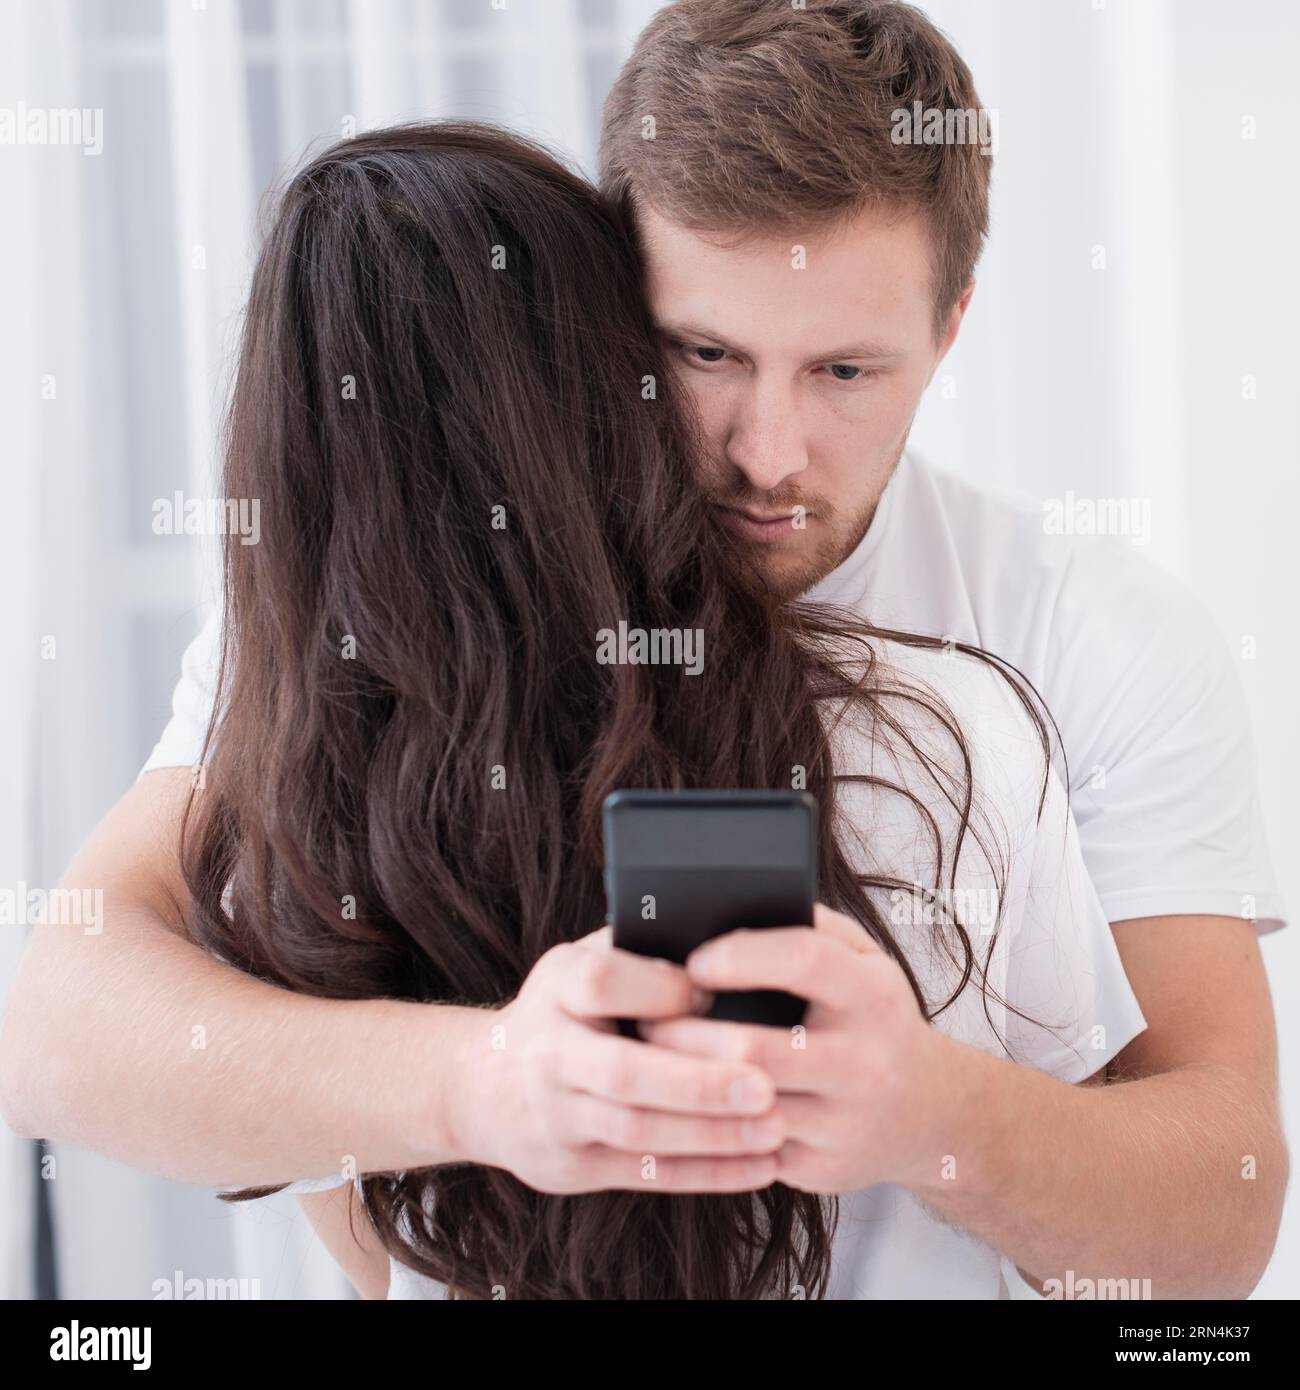 Man hugging his girlfriend while checking his phone Stock Photo